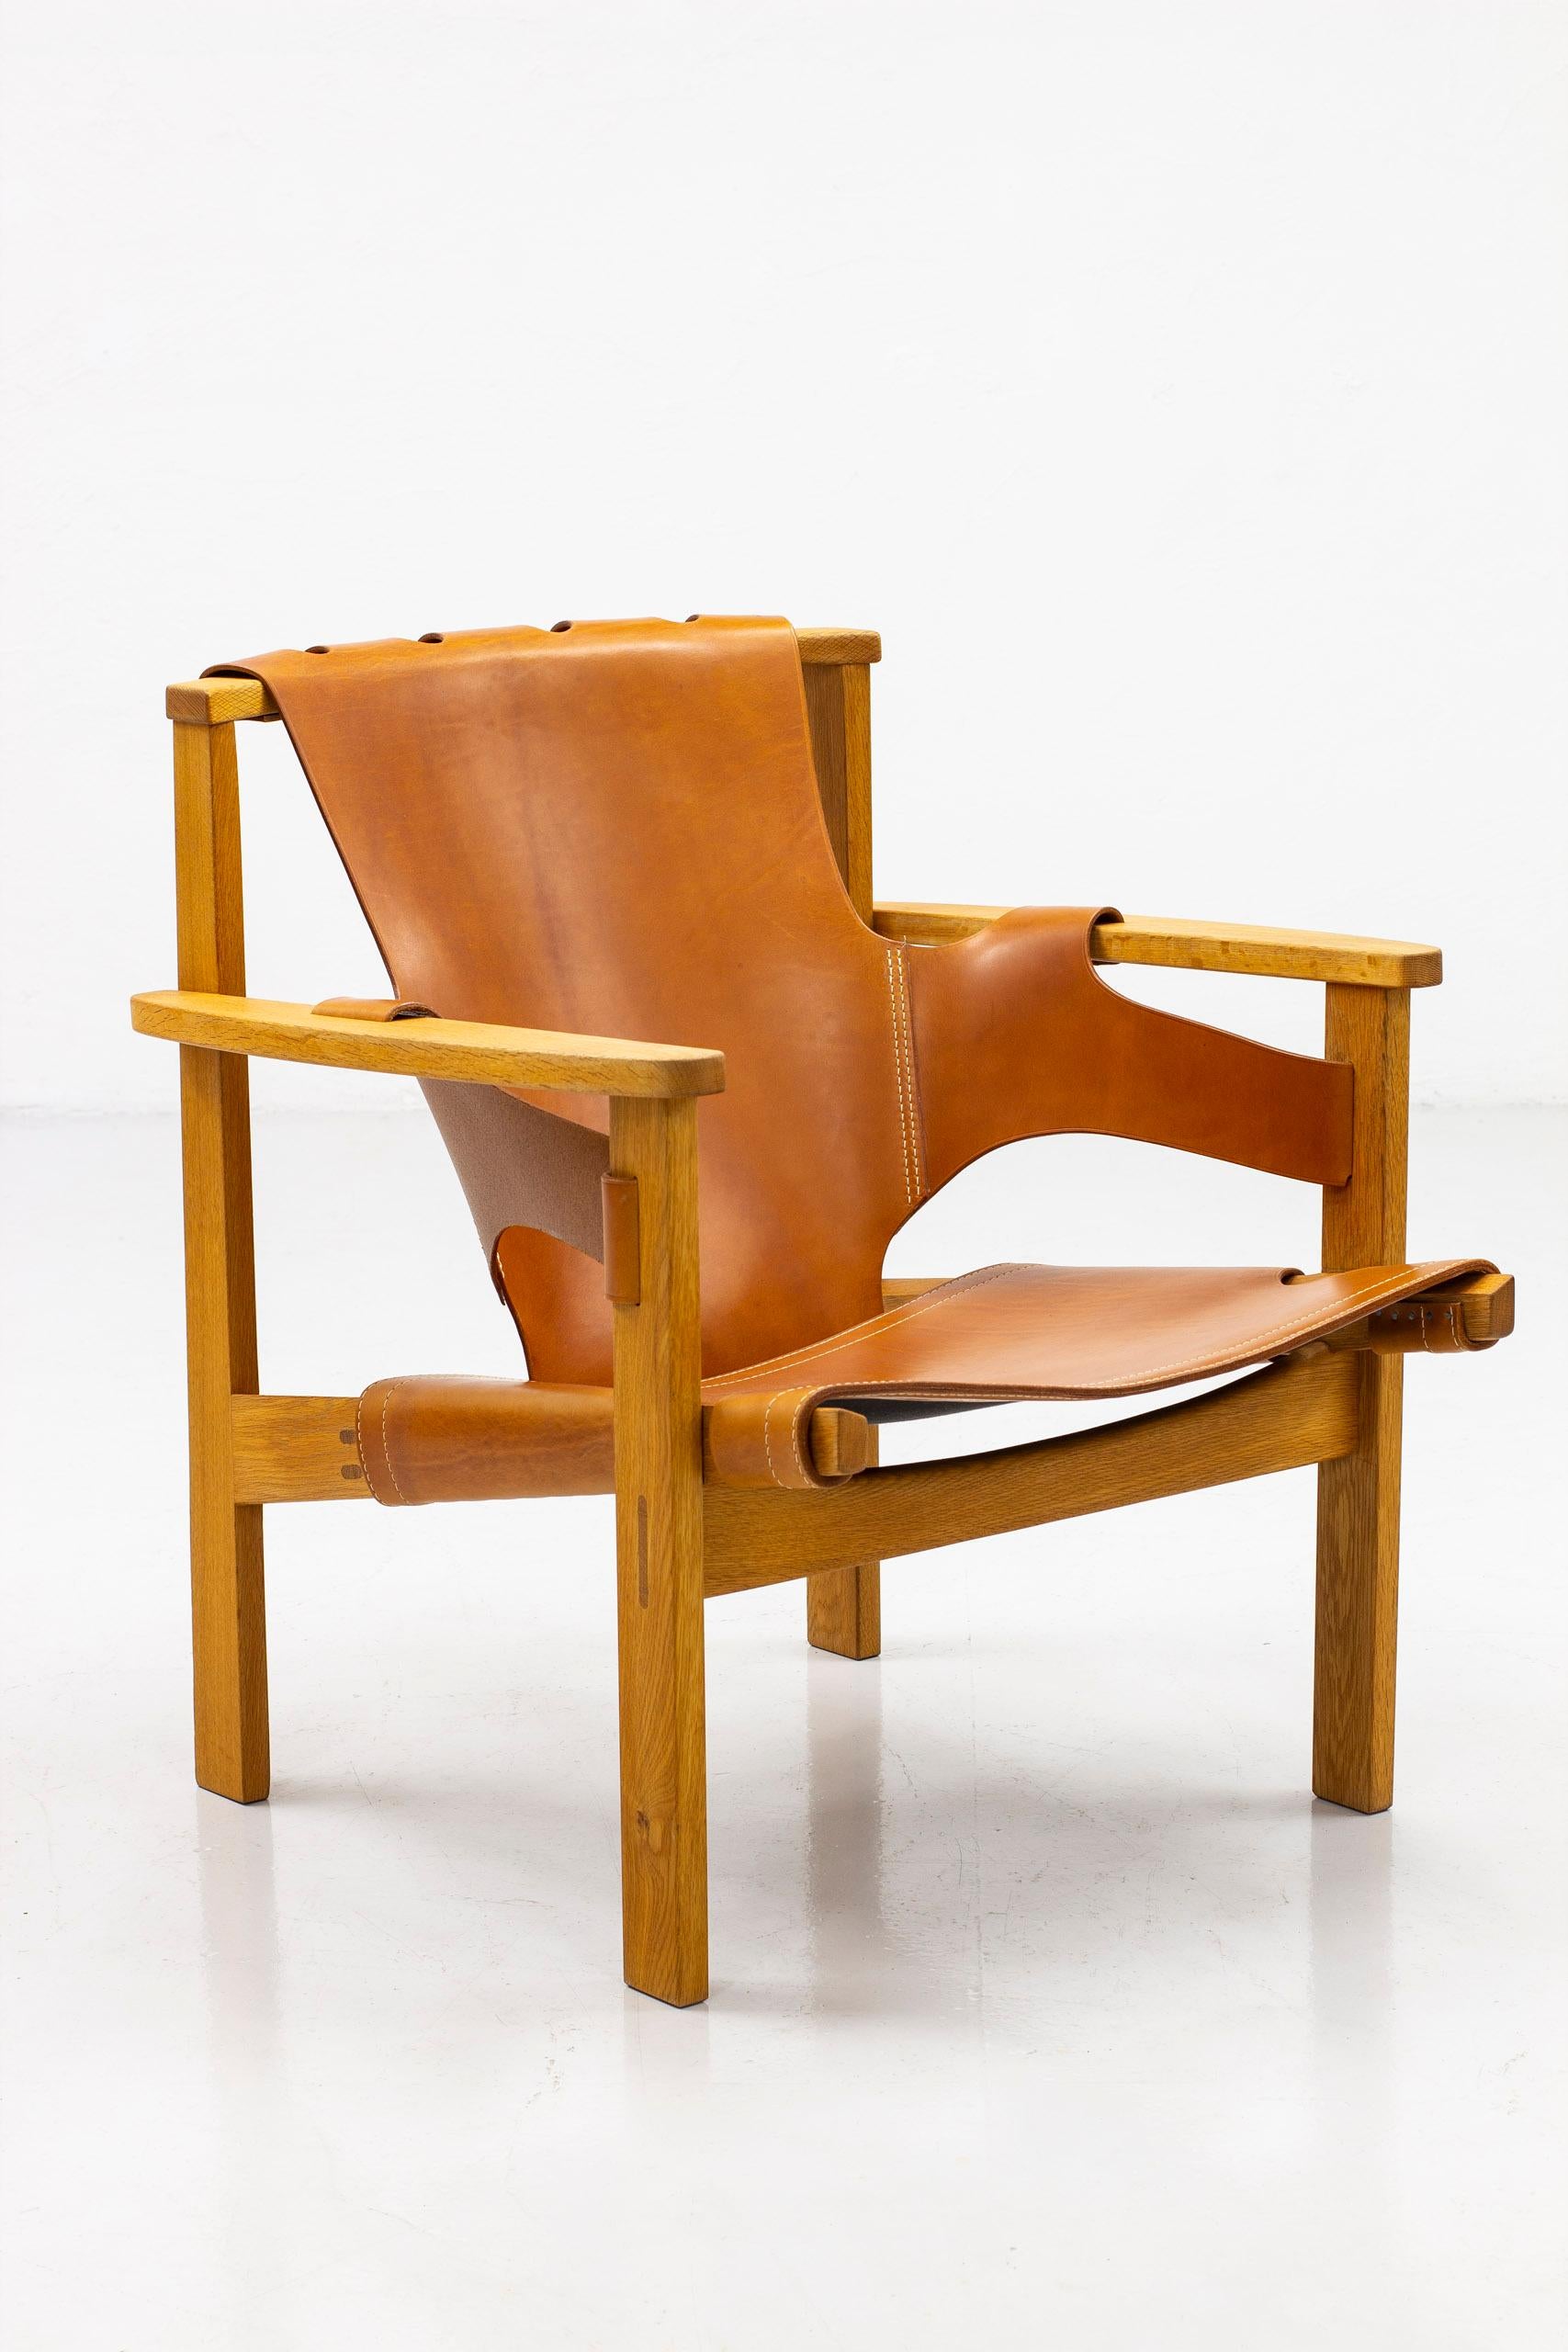 Lounge Chairs in Oak and Leather by Carl-Axel Acking, Nk, Nordiska Kompaniet 9